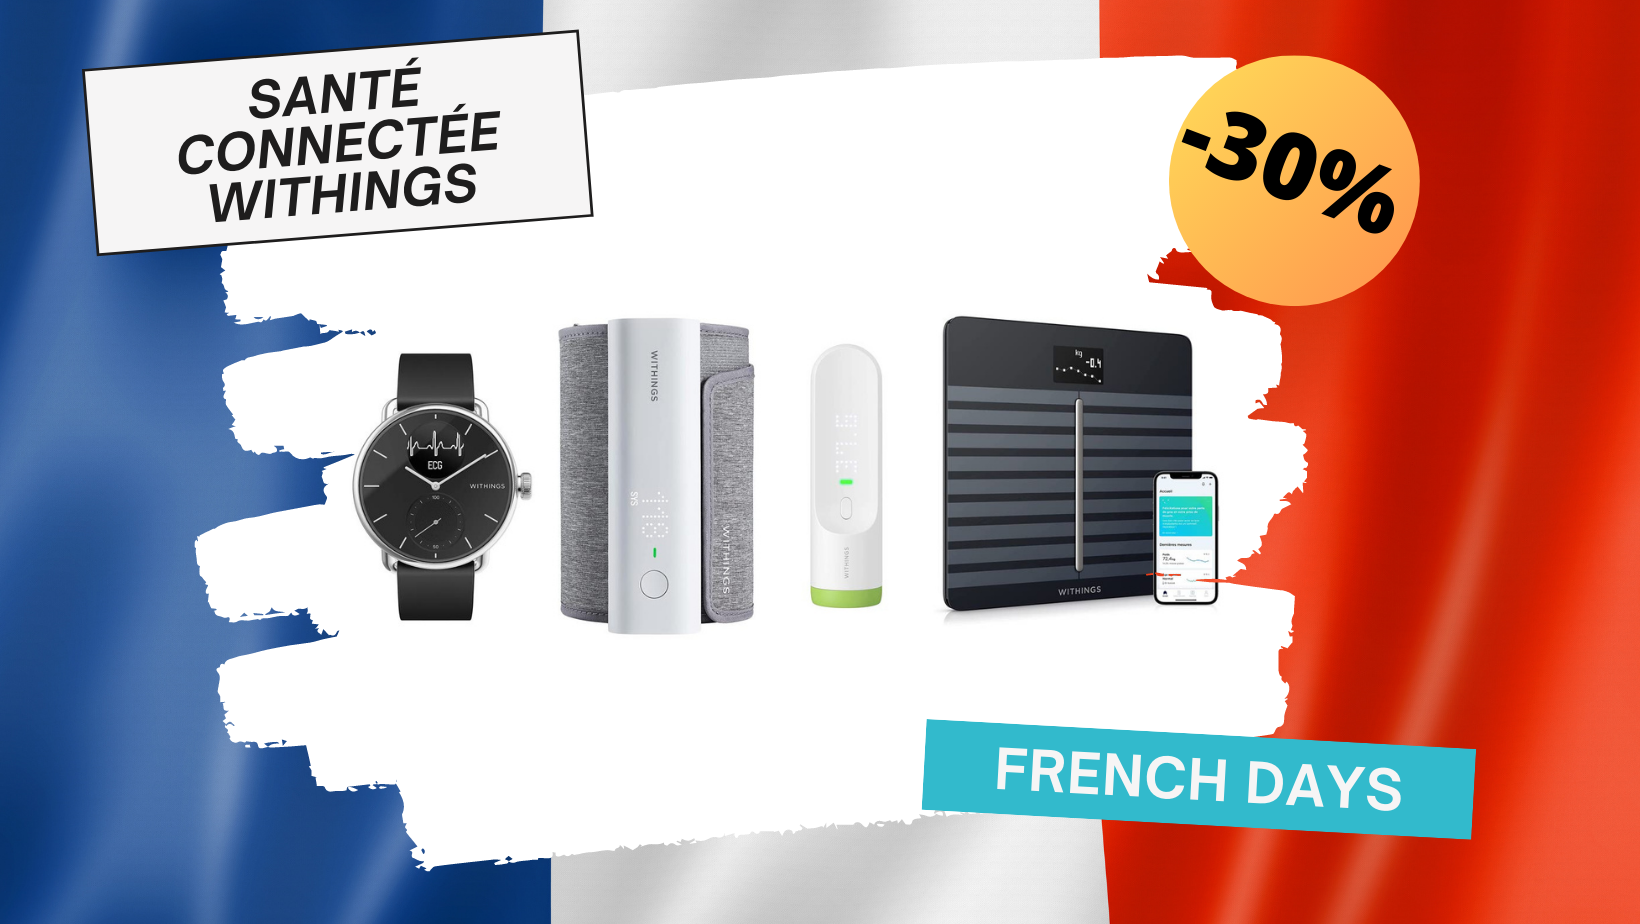 withings french days